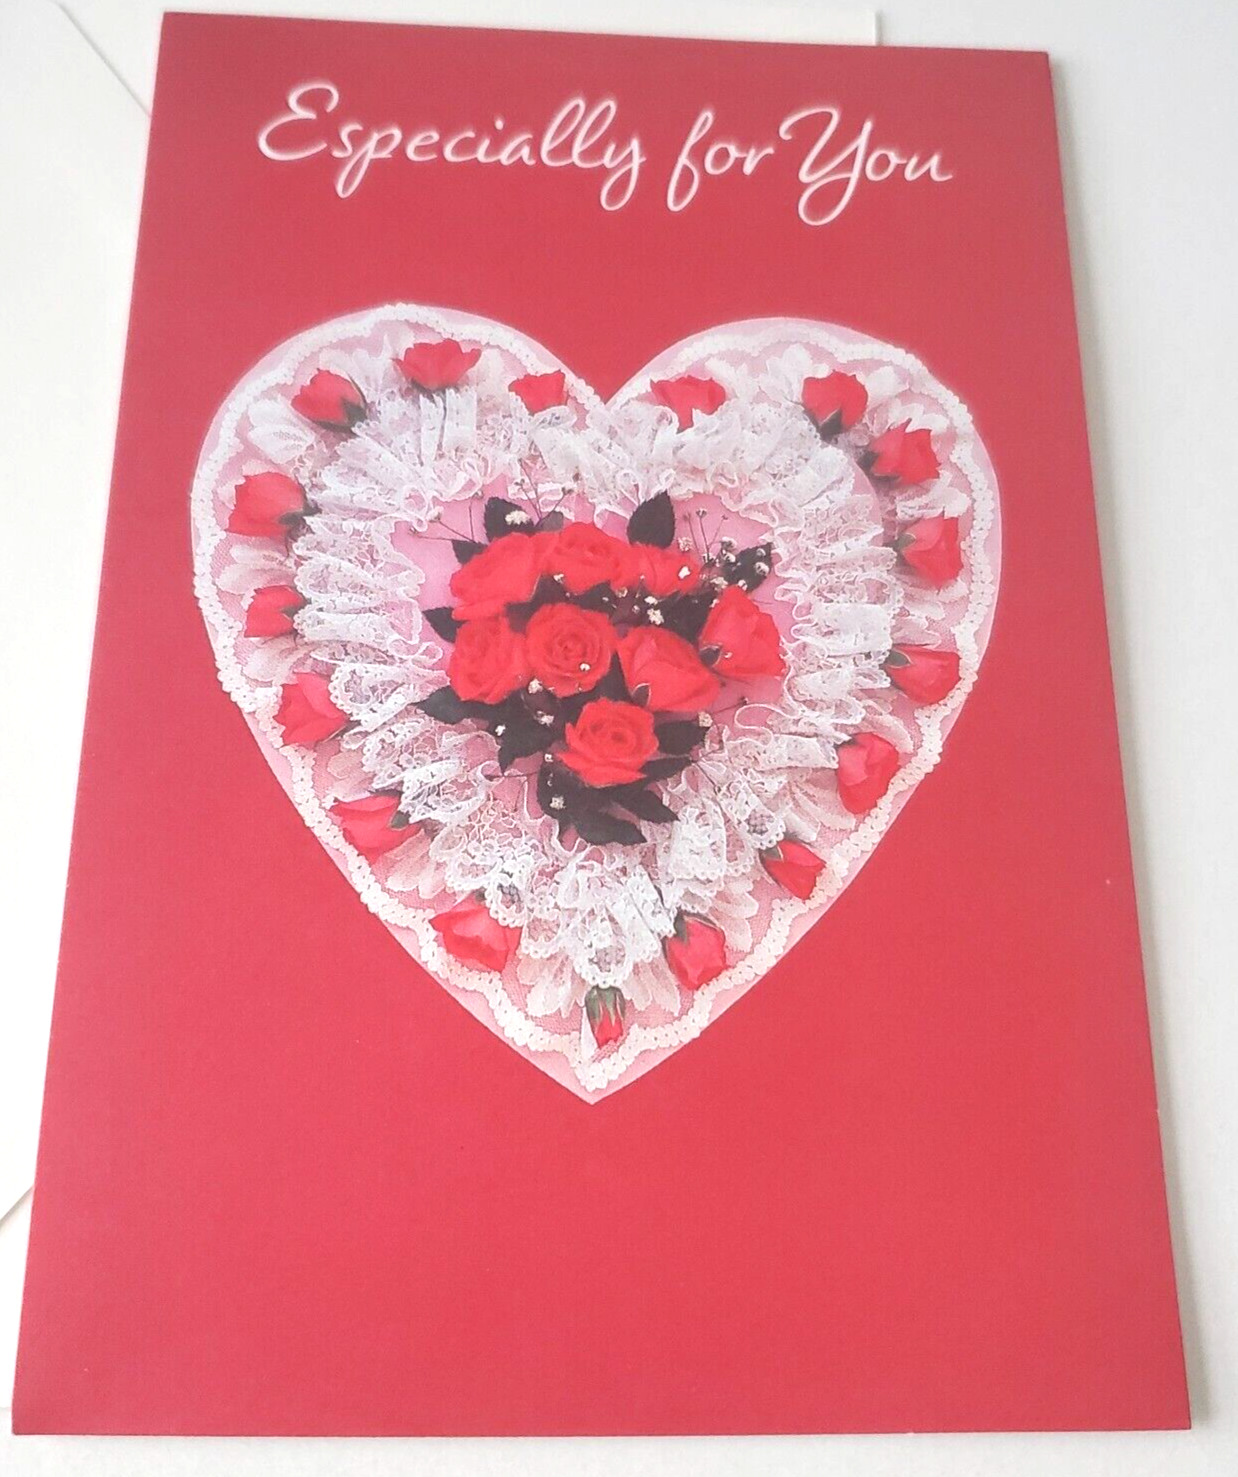 Vintage Valentine Card Red Roses Lacy Heart Especially for You